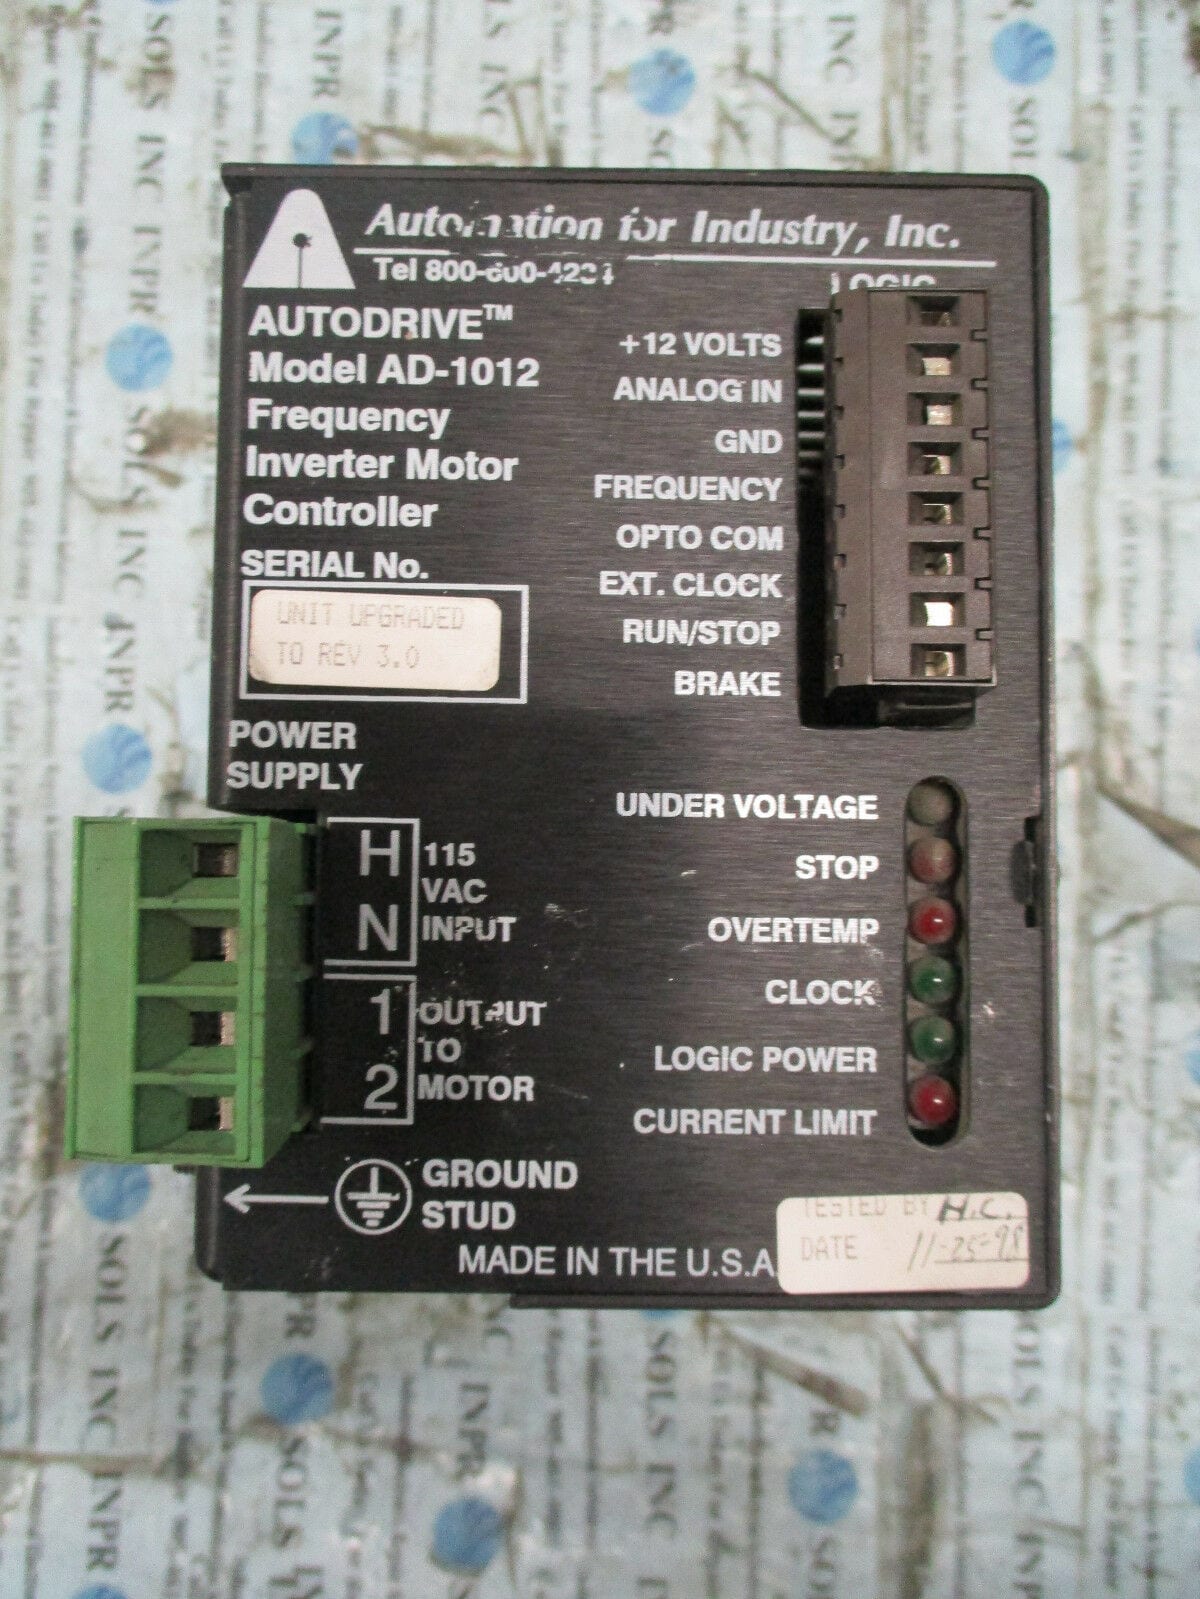 inc AD-1012 Frequancy Inverter Motor Controller Automation for Industry 